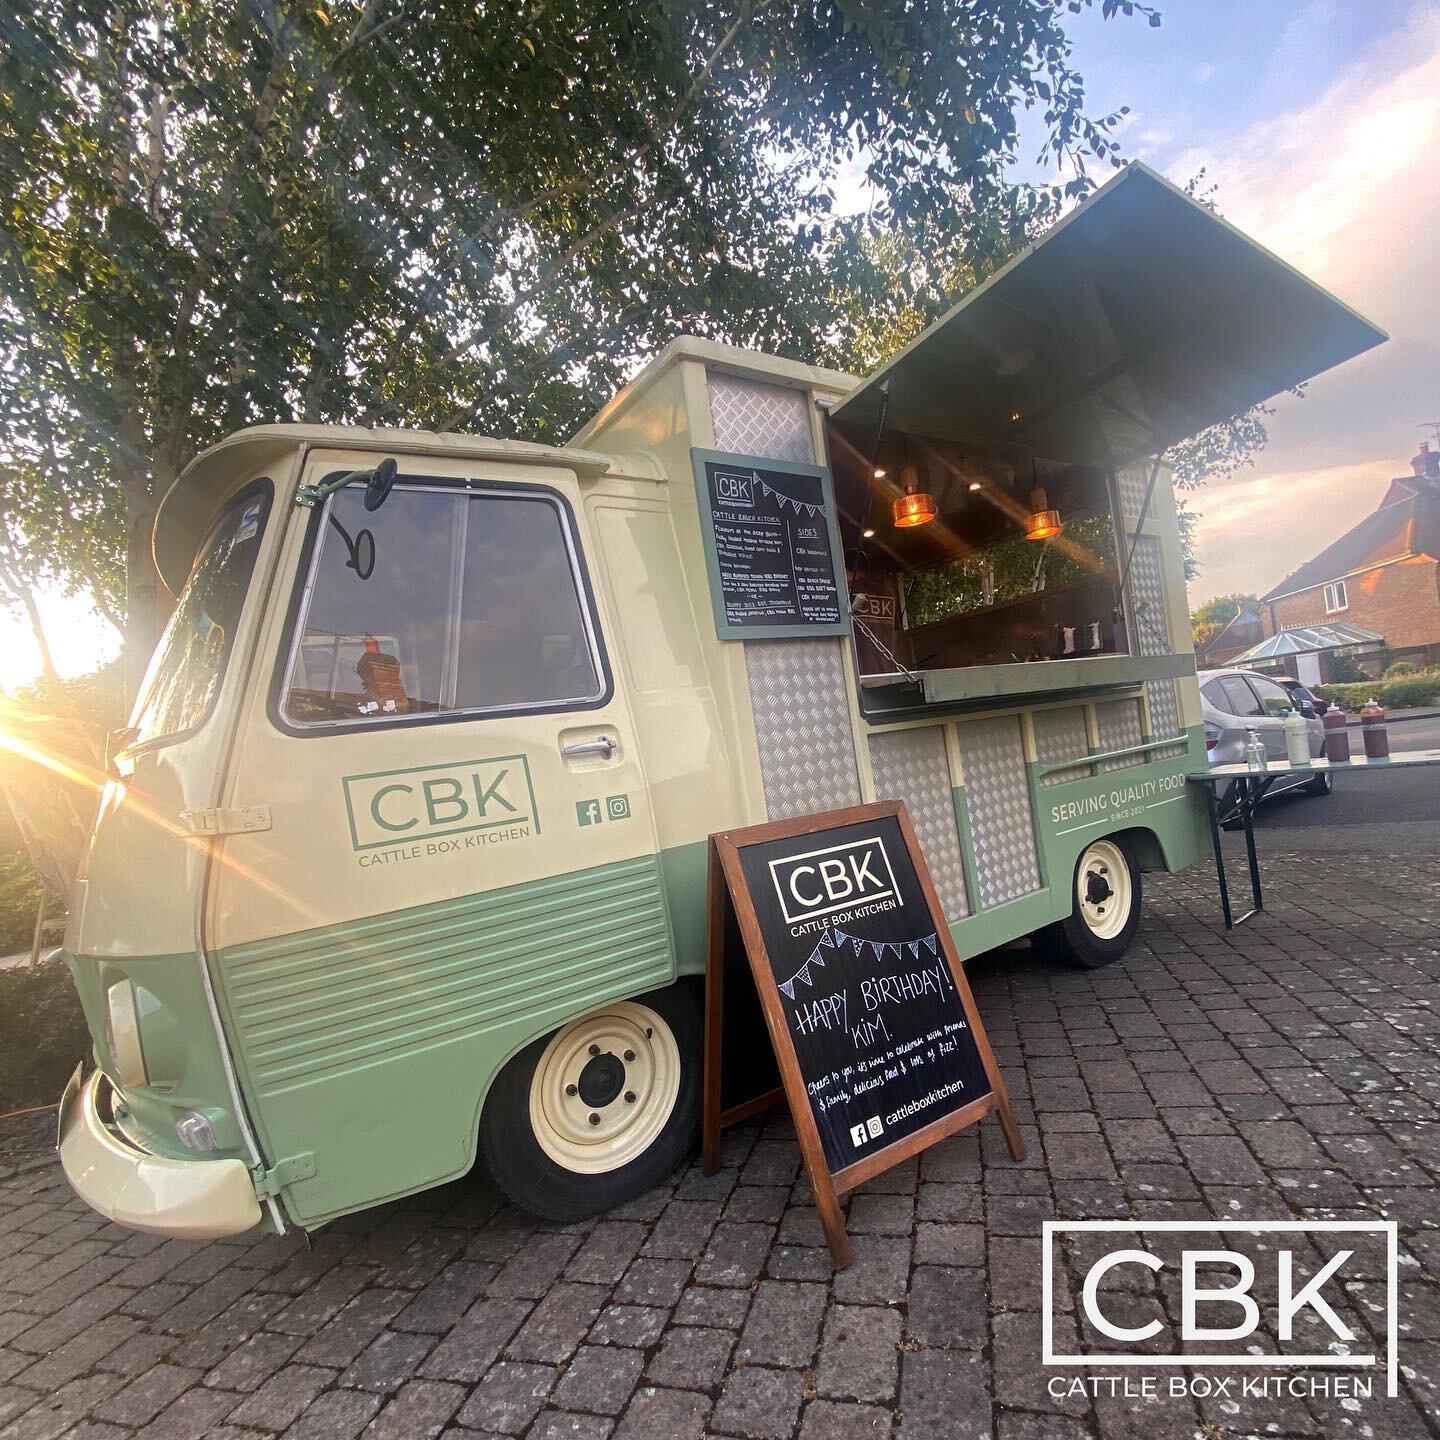 A night out for the truck 🙌🏽 dishing up flavours of the Deep South 🐄 thank you for letting us be a part of the birthday celebrations, Happy Birthday Kim 🥂 
.
#foodtruck #foodvan #cbk #cattleboxkitchen #peugeot #peugeotj7 #vintagetruck #vintagevan